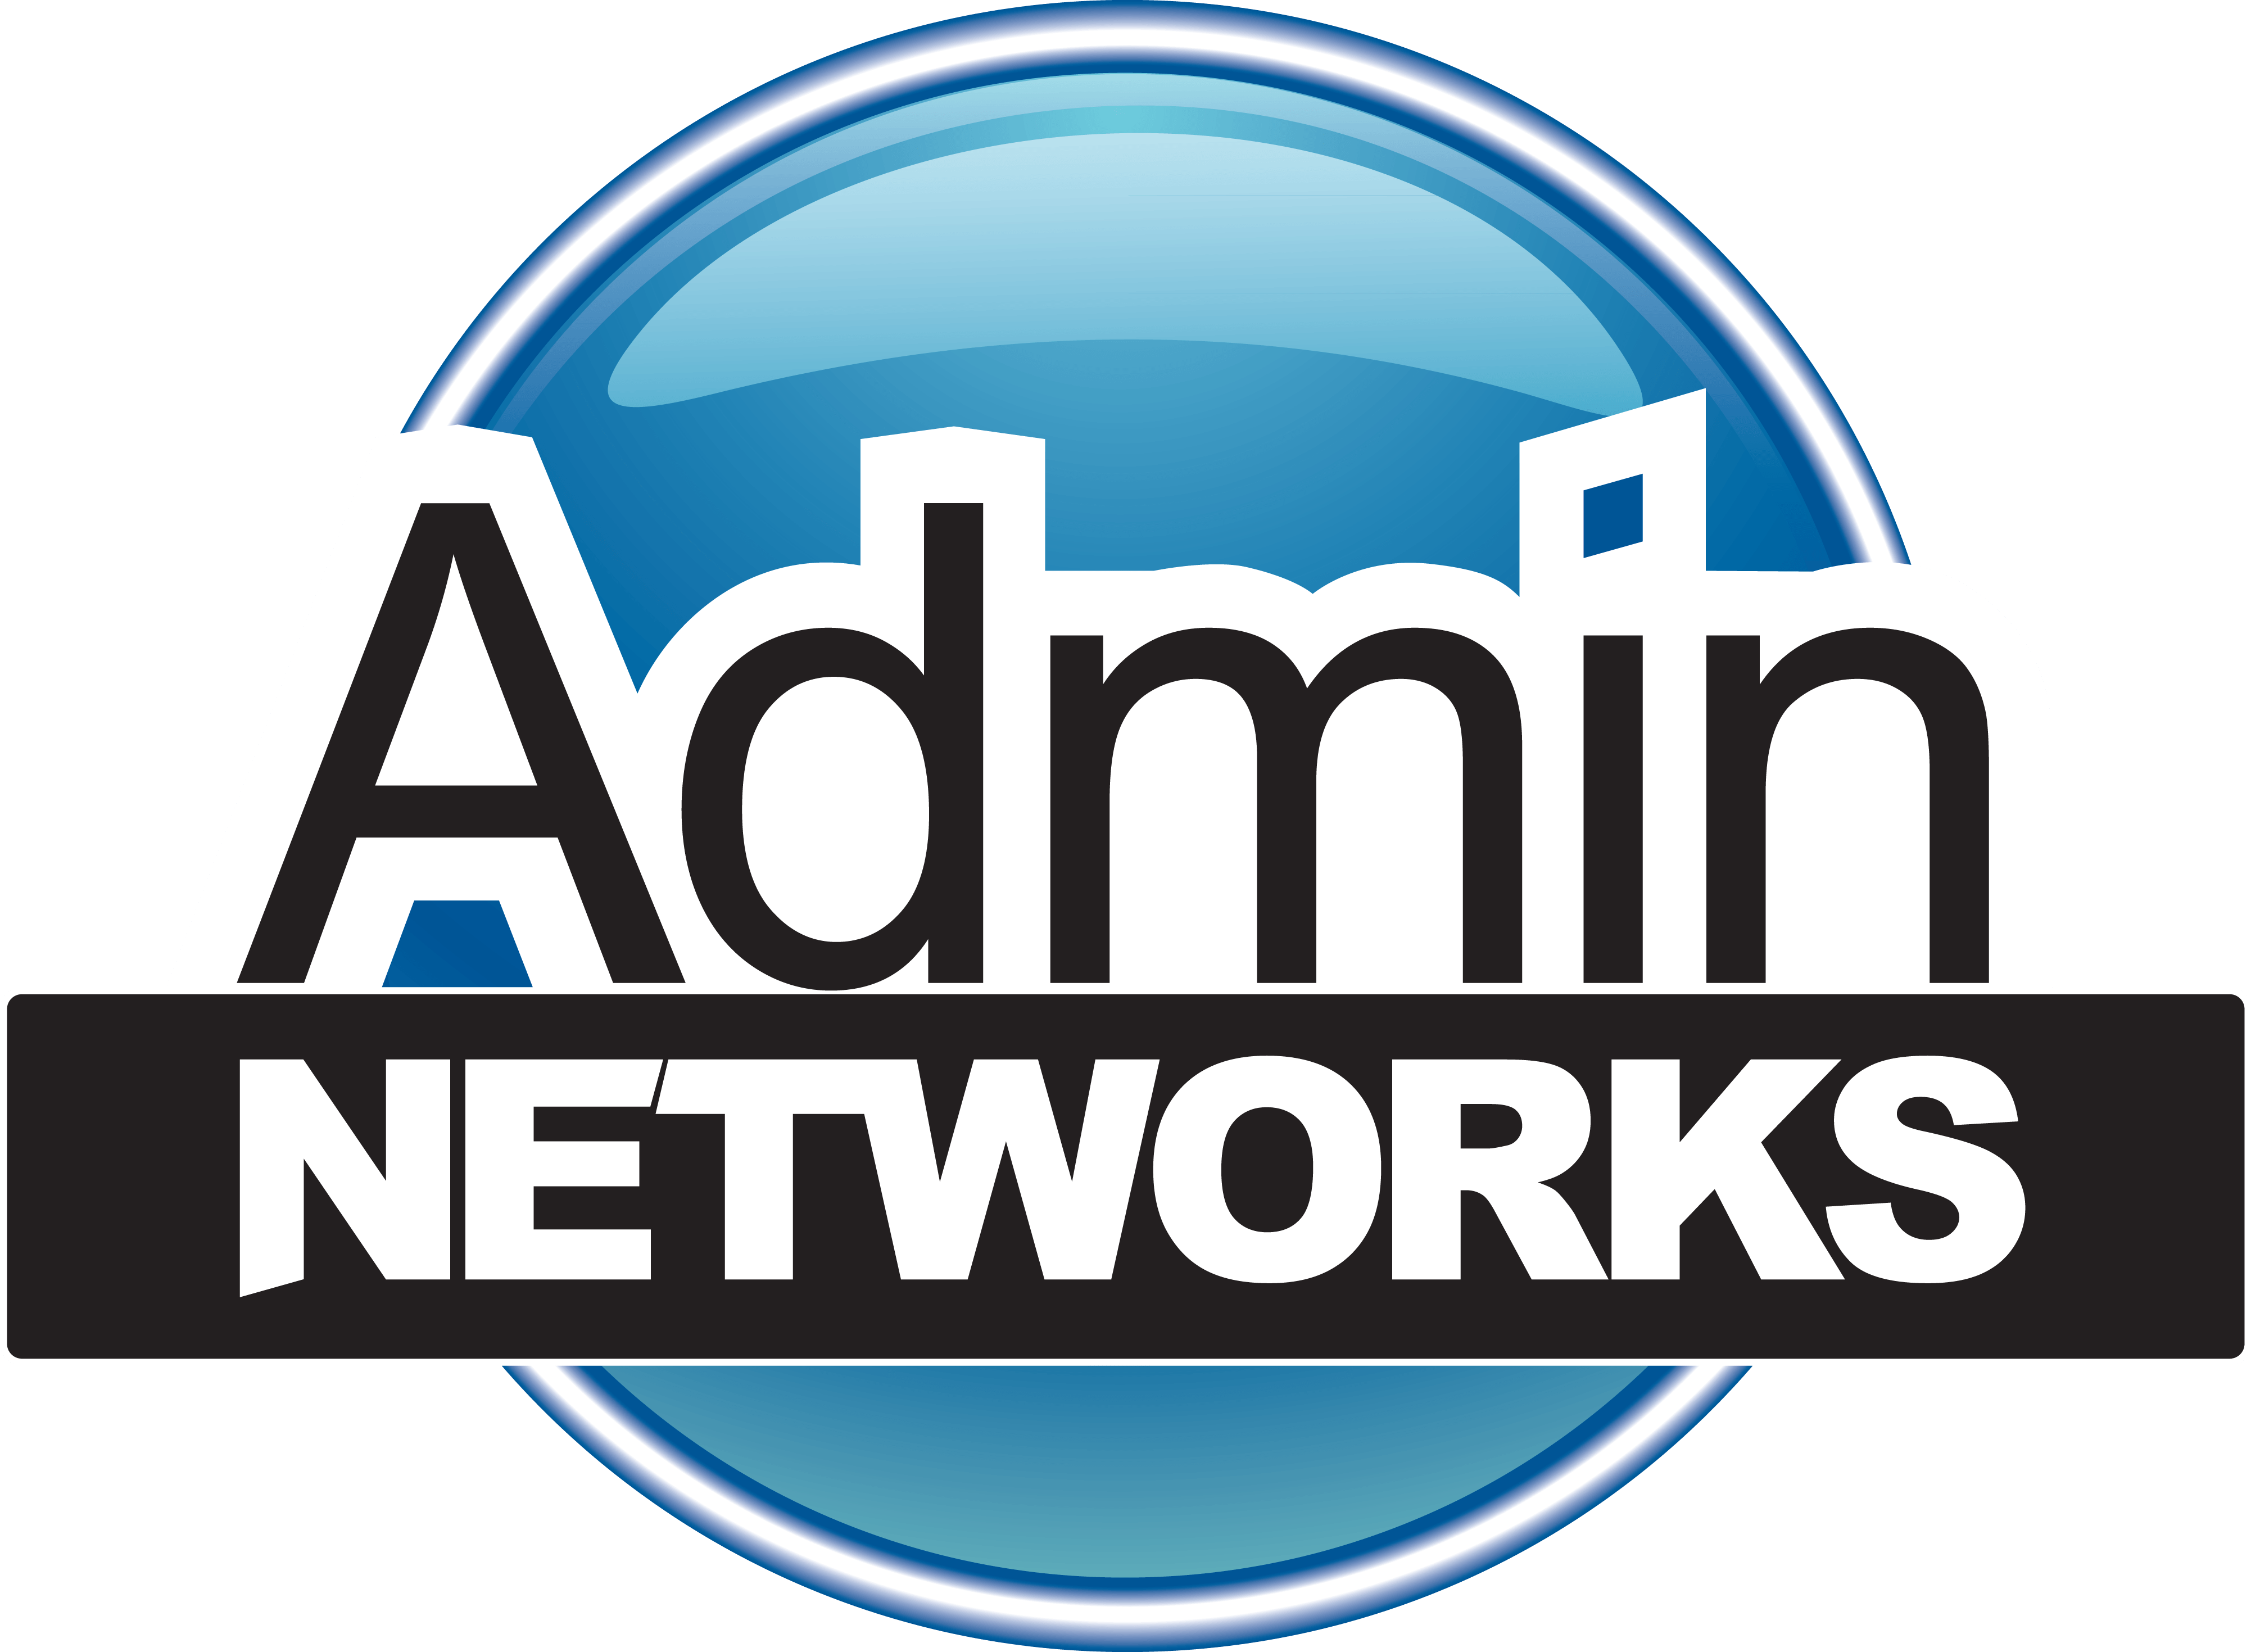 Admin Logo - Admin Networks: Computer Repair, Network Solutions, Data and Voice